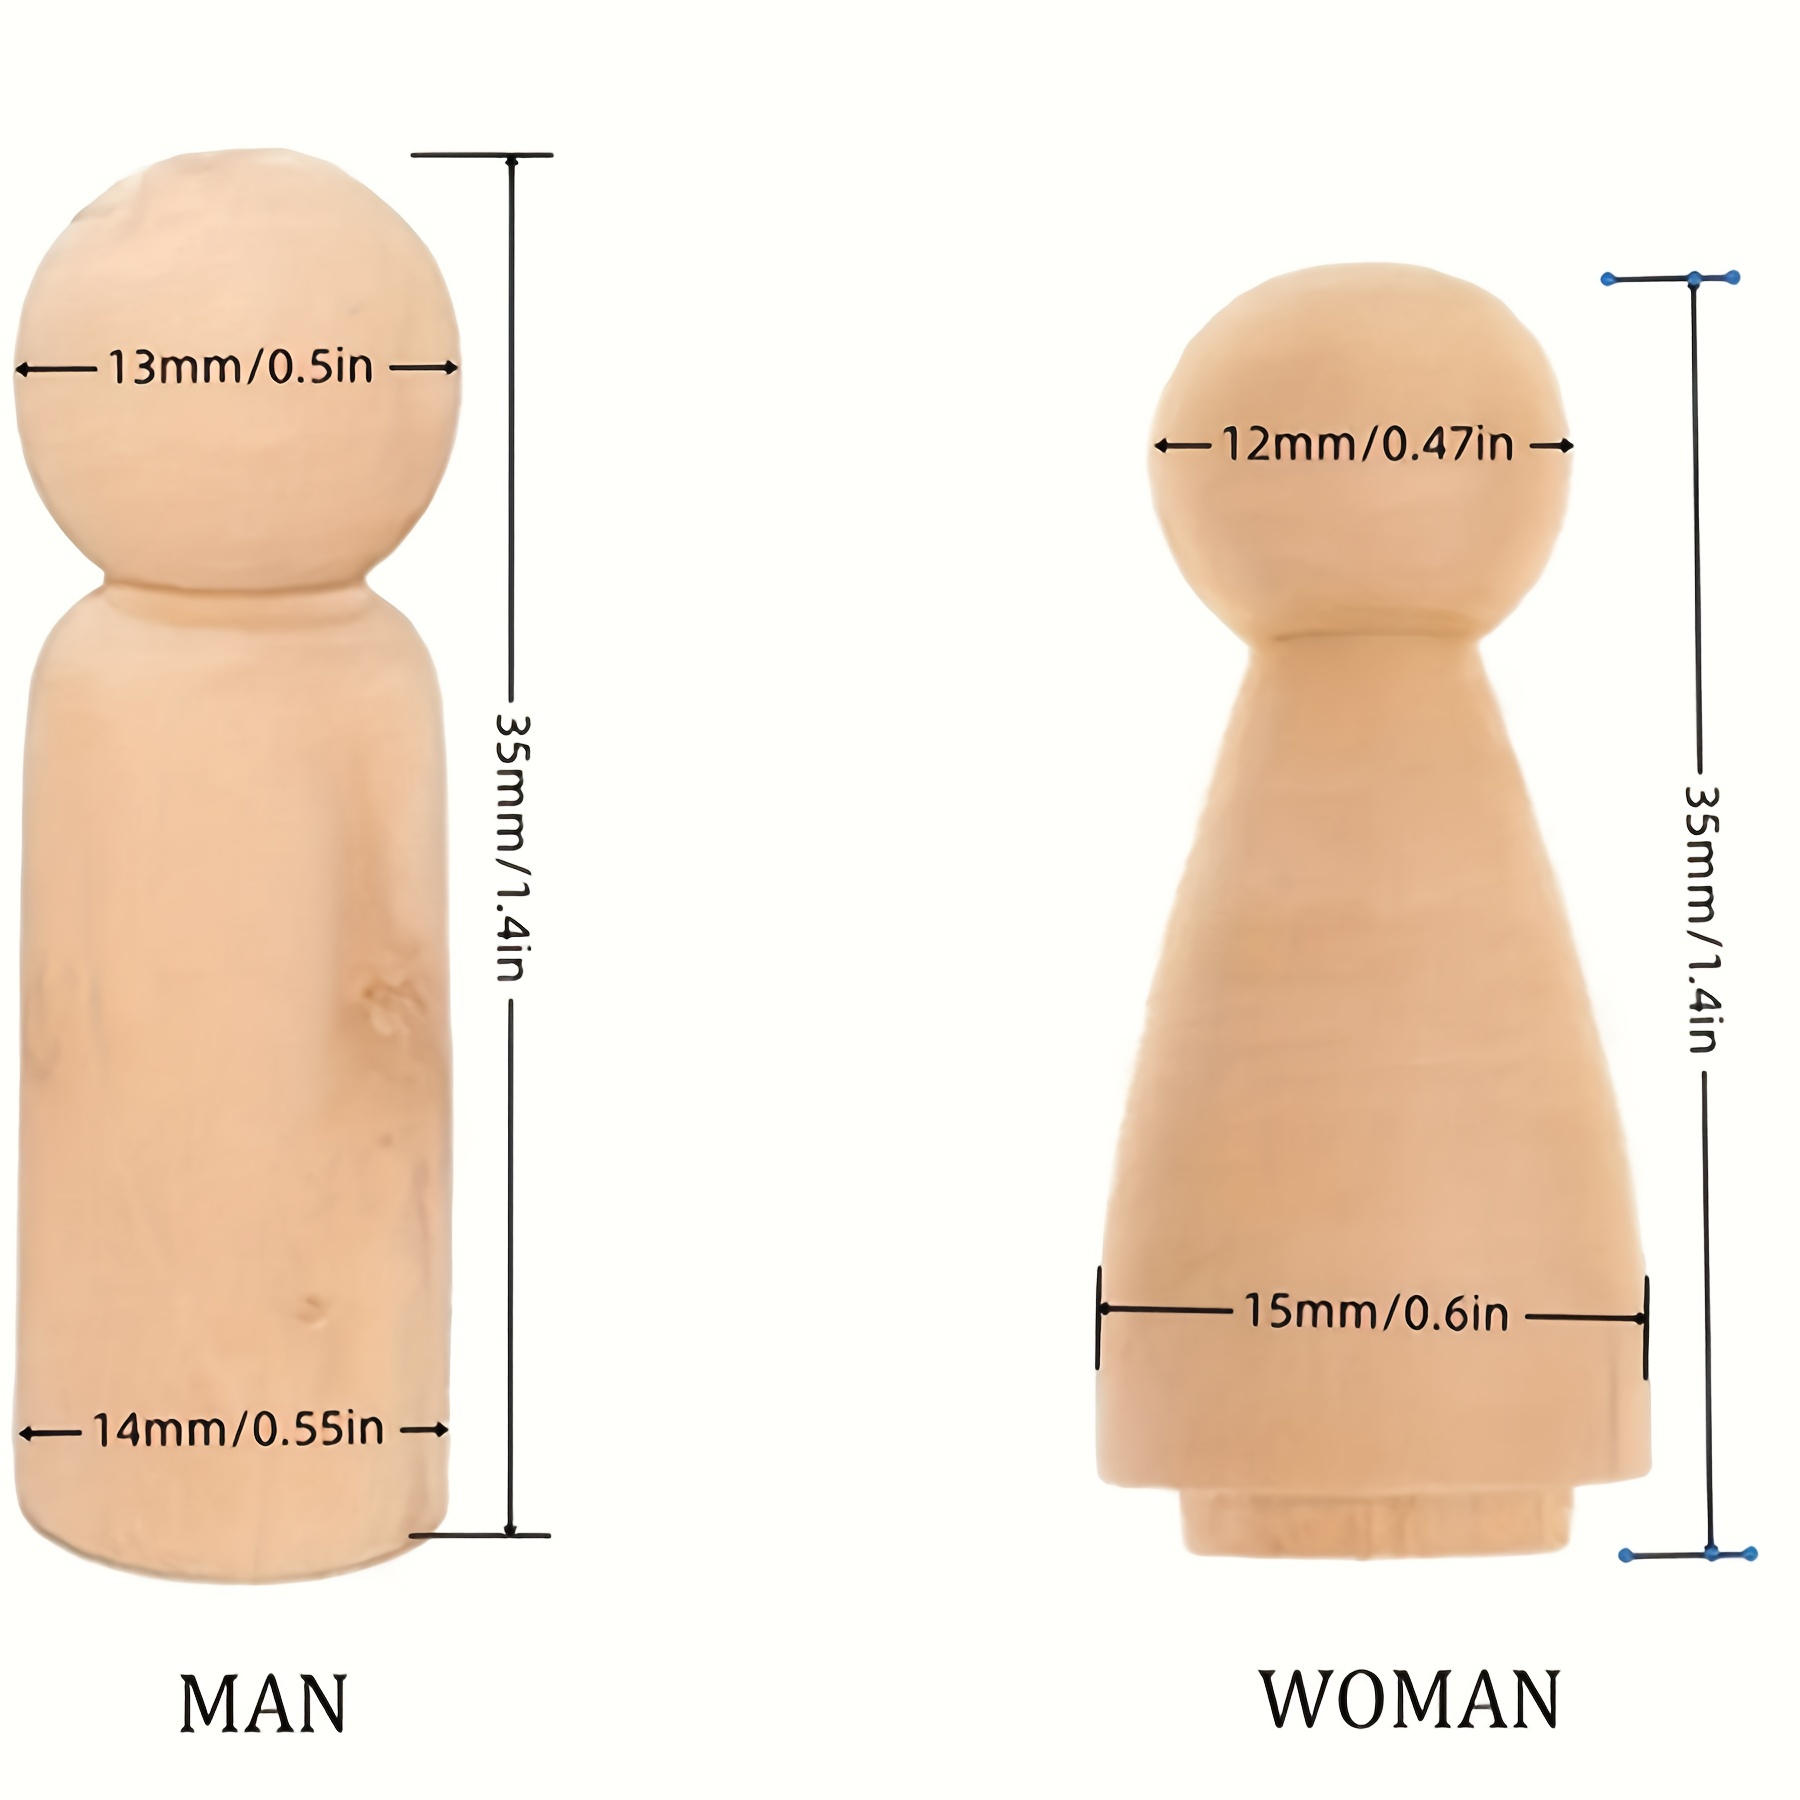 Unfinished Wooden Peg Dolls, Peg People, Doll Bodies, Wooden